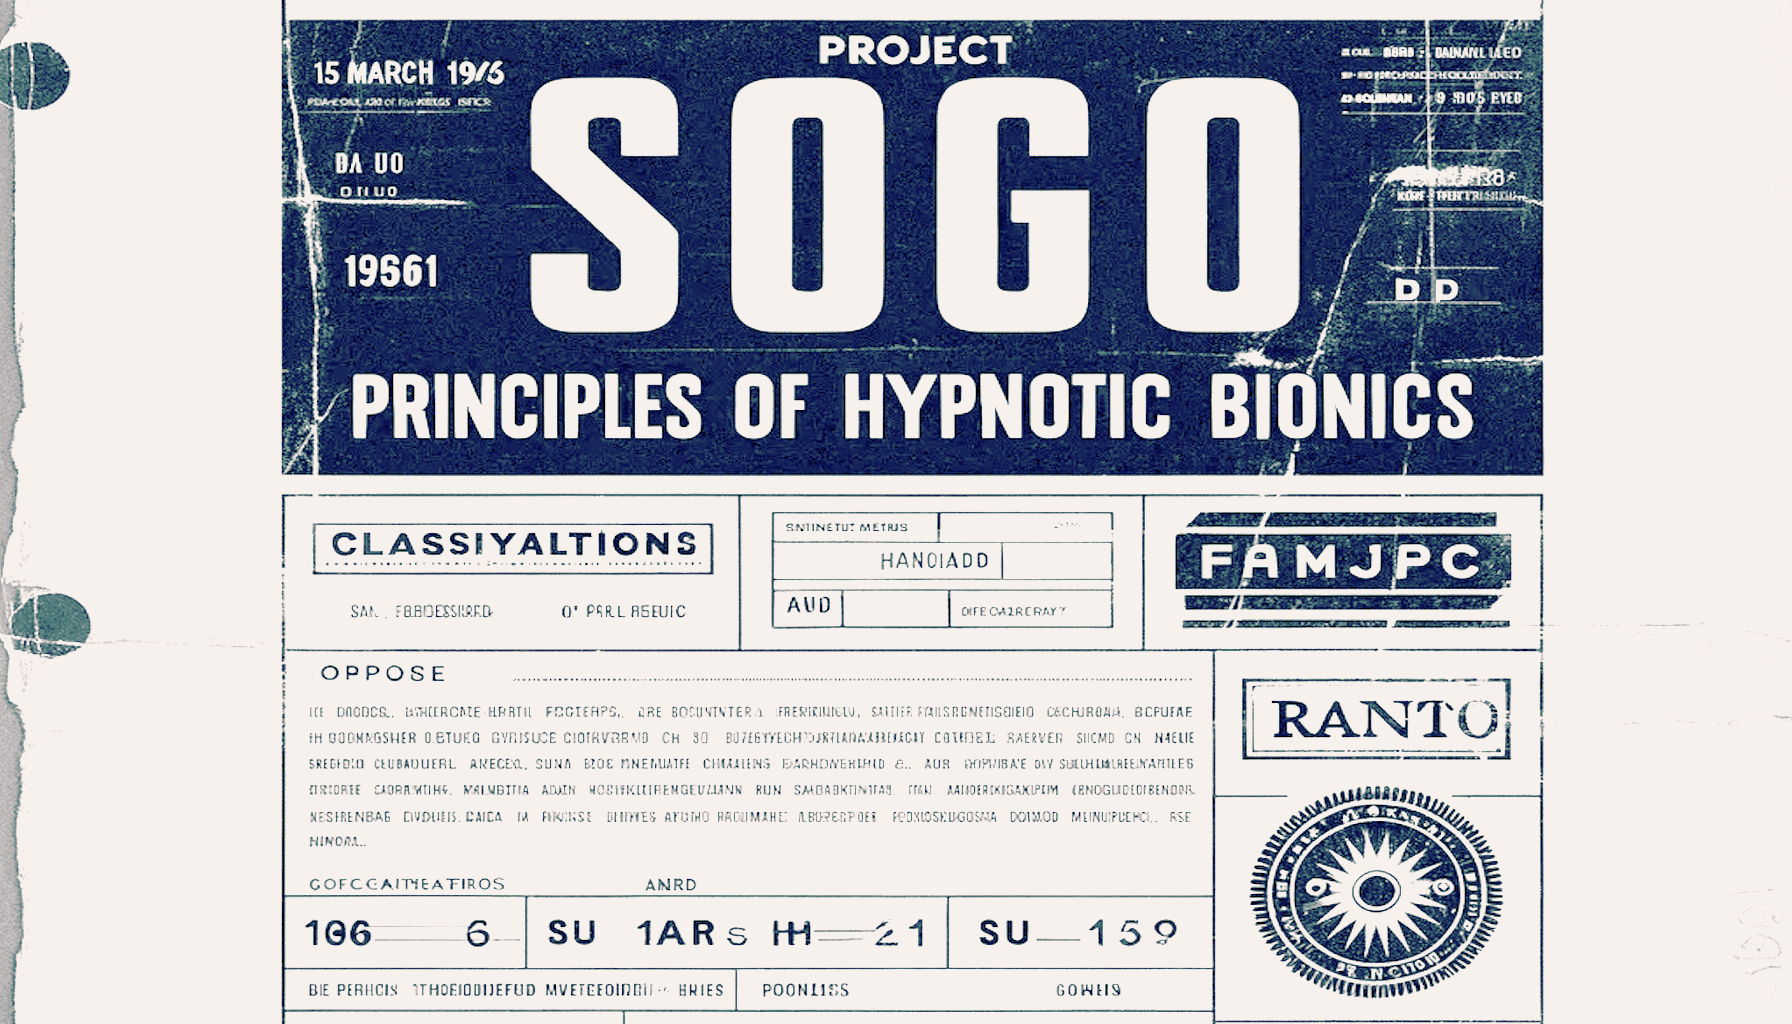 The cover of &#039;Project SOGO: Principles of Hypnotic Bionics'. It is a combination of 'Project PARA: Principles of Neurodynamics' and 'Shoggoth' from Lovecraft's cosmology. The idea is that the book is mythical like the Necronomicon (see Minsky's quote). In the style of a cold-war era RAND corporation report.